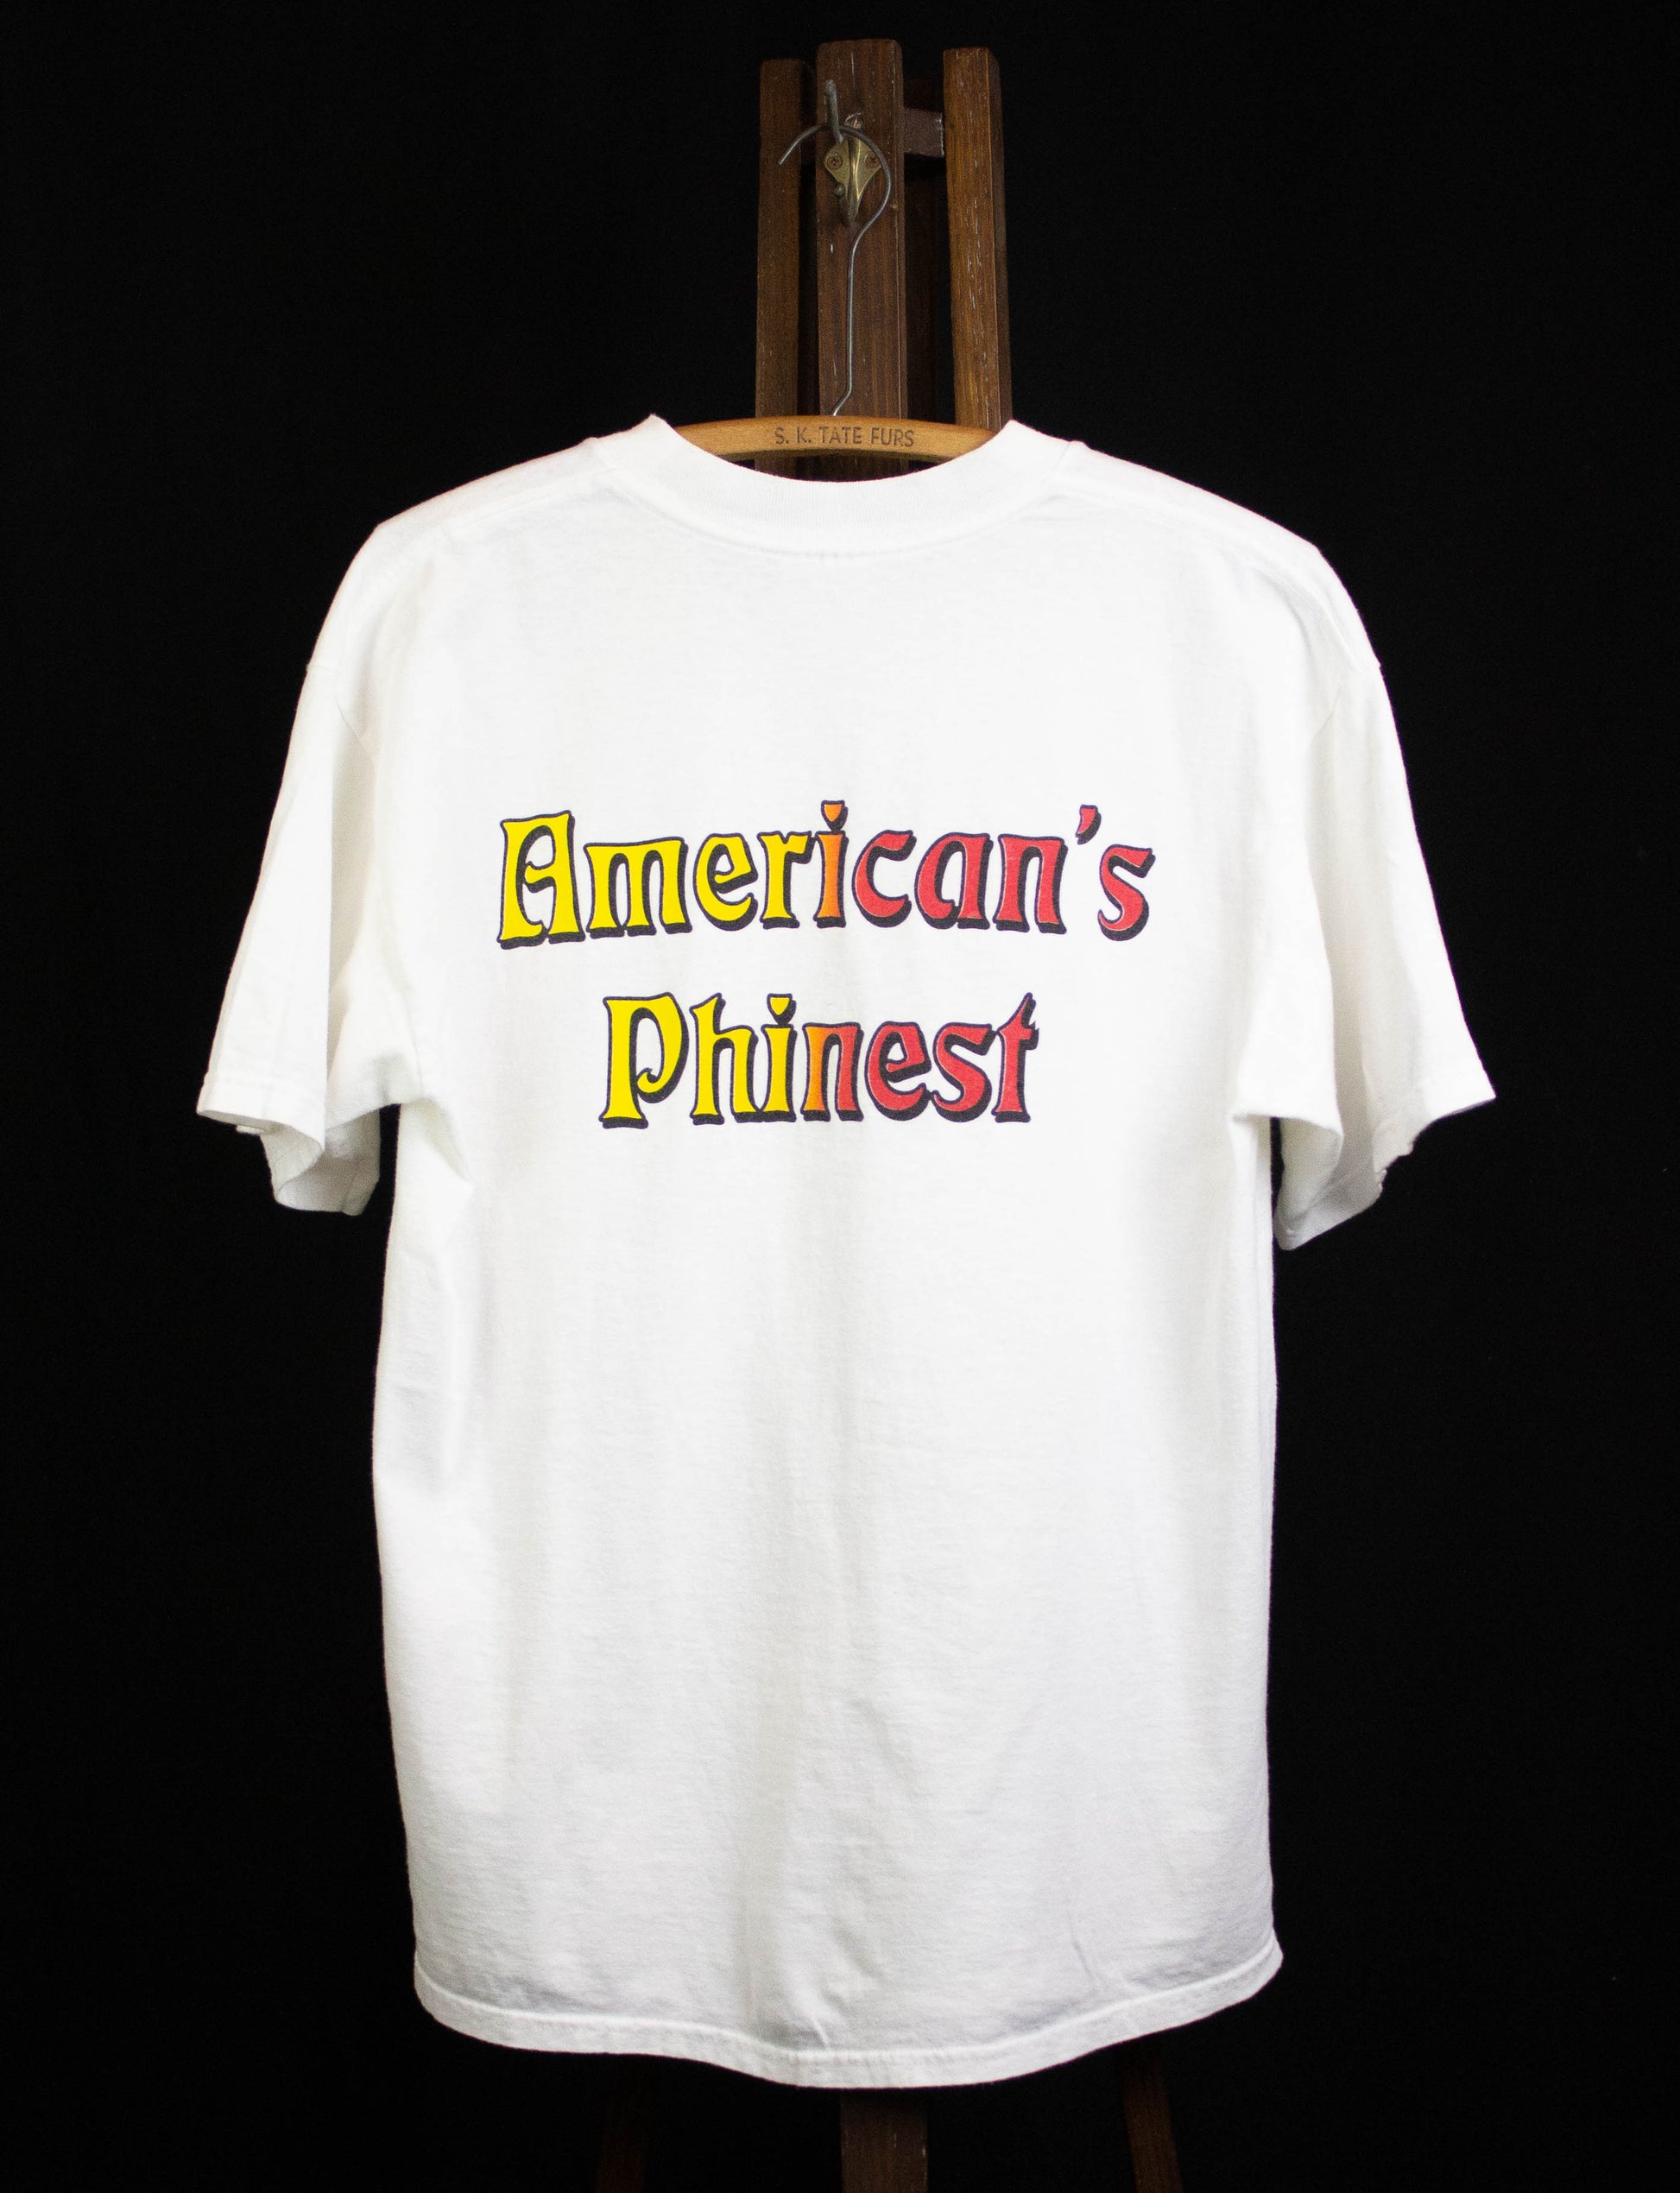 Vintage 2000s Phish "American's Phinest" Bootleg Concert T Shirt Large